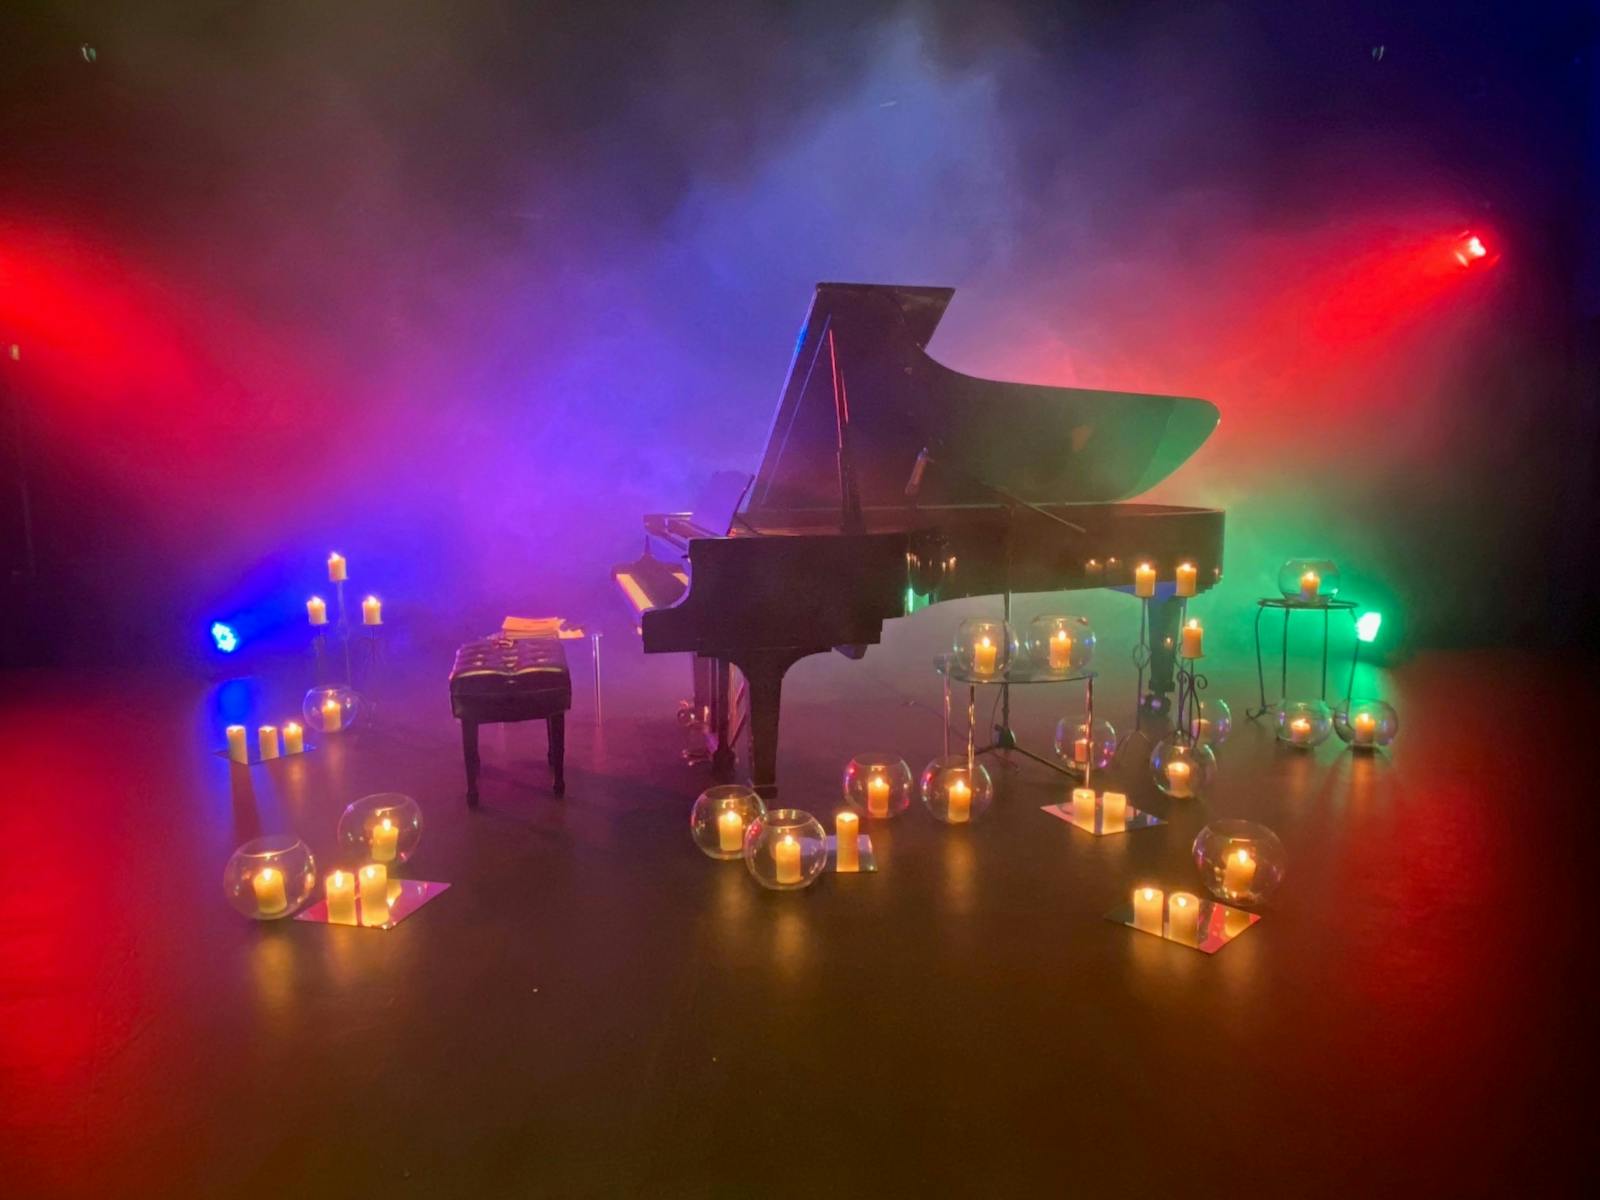 Grand piano, candles, mood lighting, stage, venue set up for Steinway on Stage event